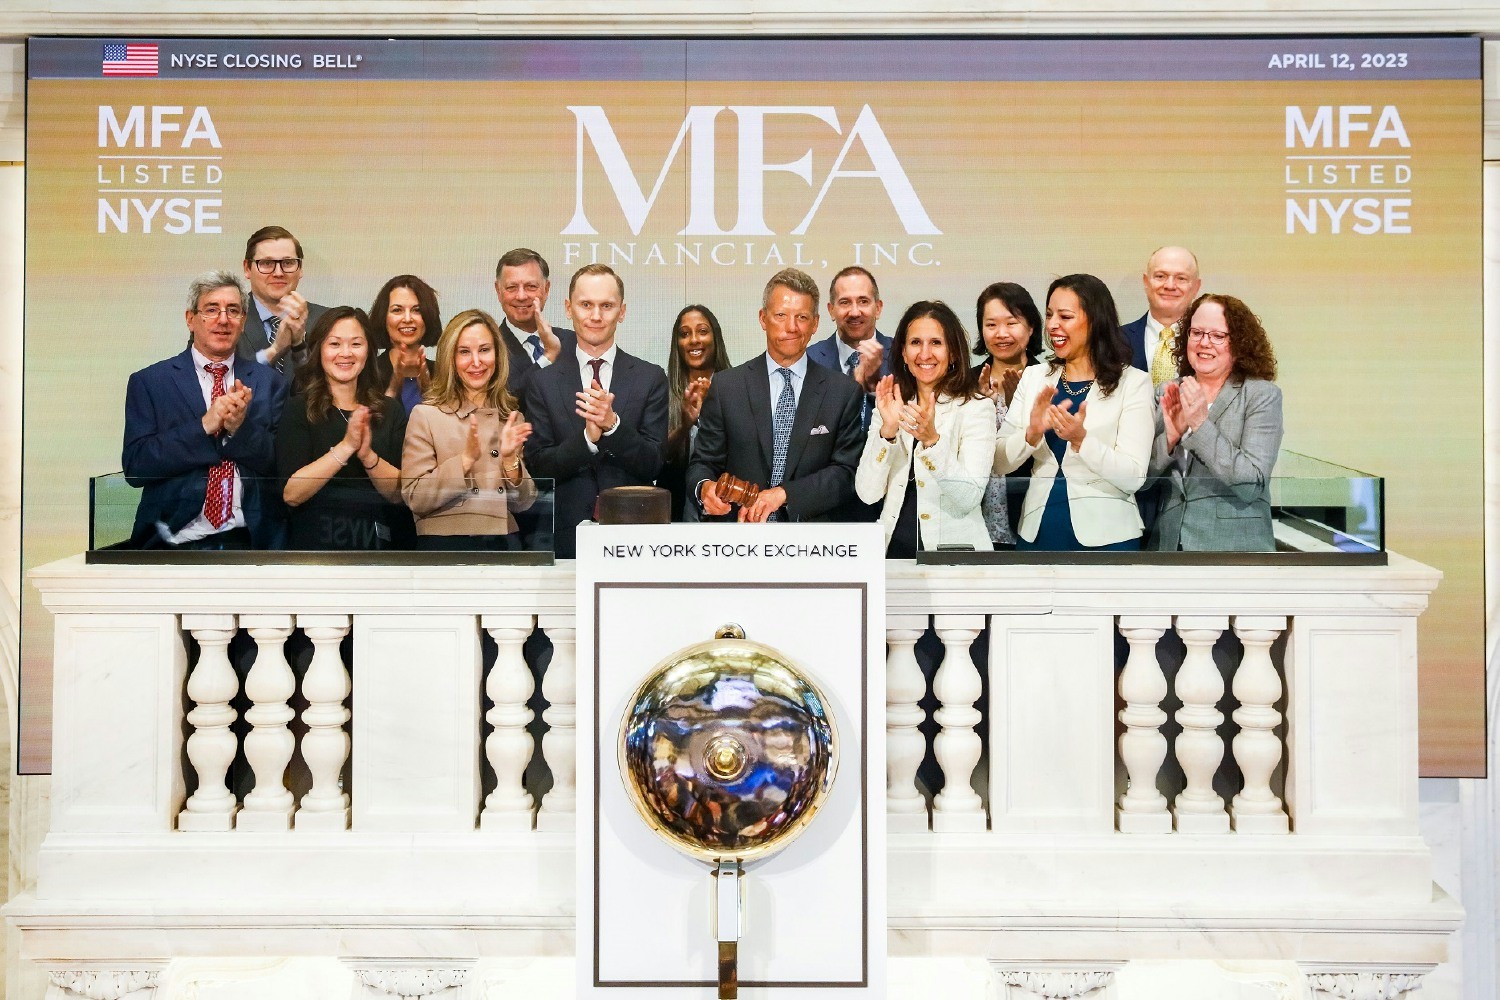 MFA Rings the Bell at the NYSE (25 Years!)